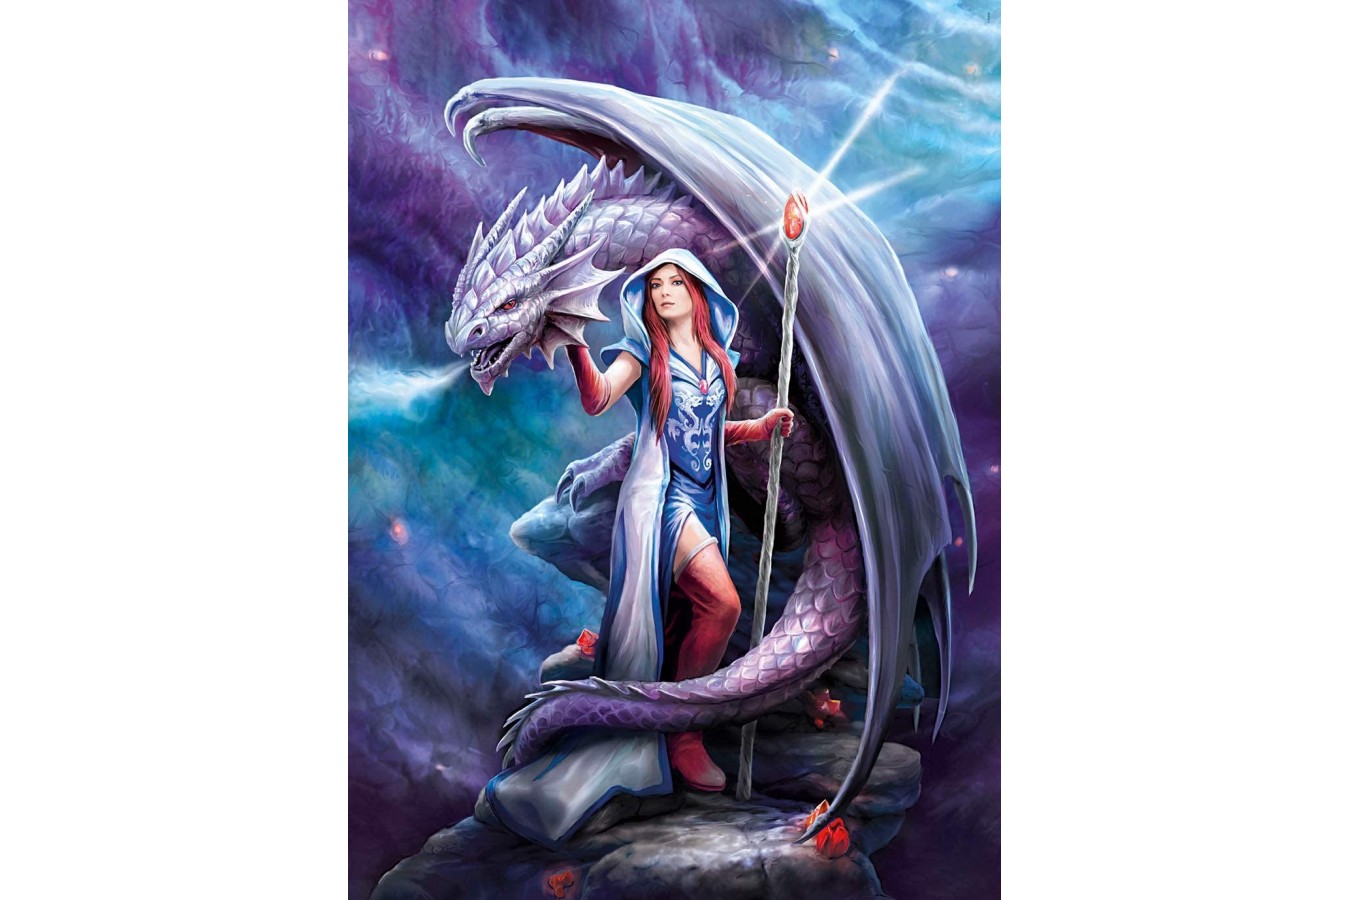 Puzzle Clementoni - Anne Stokes: Dragon Mage, 1000 piese (39525)